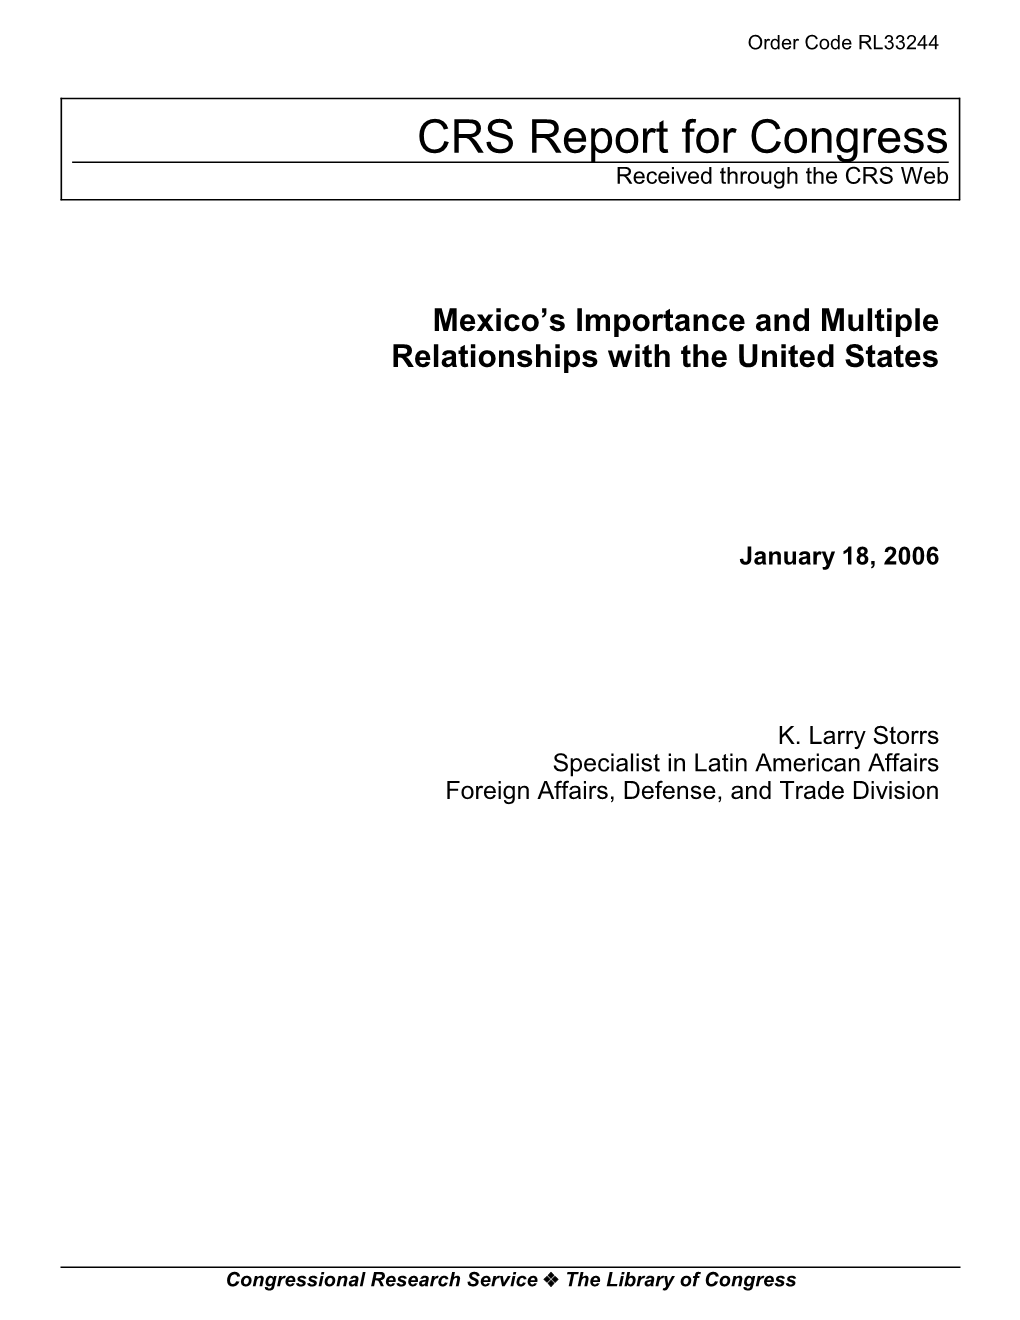 Mexico's Importance and Multiple Relationships with the United States